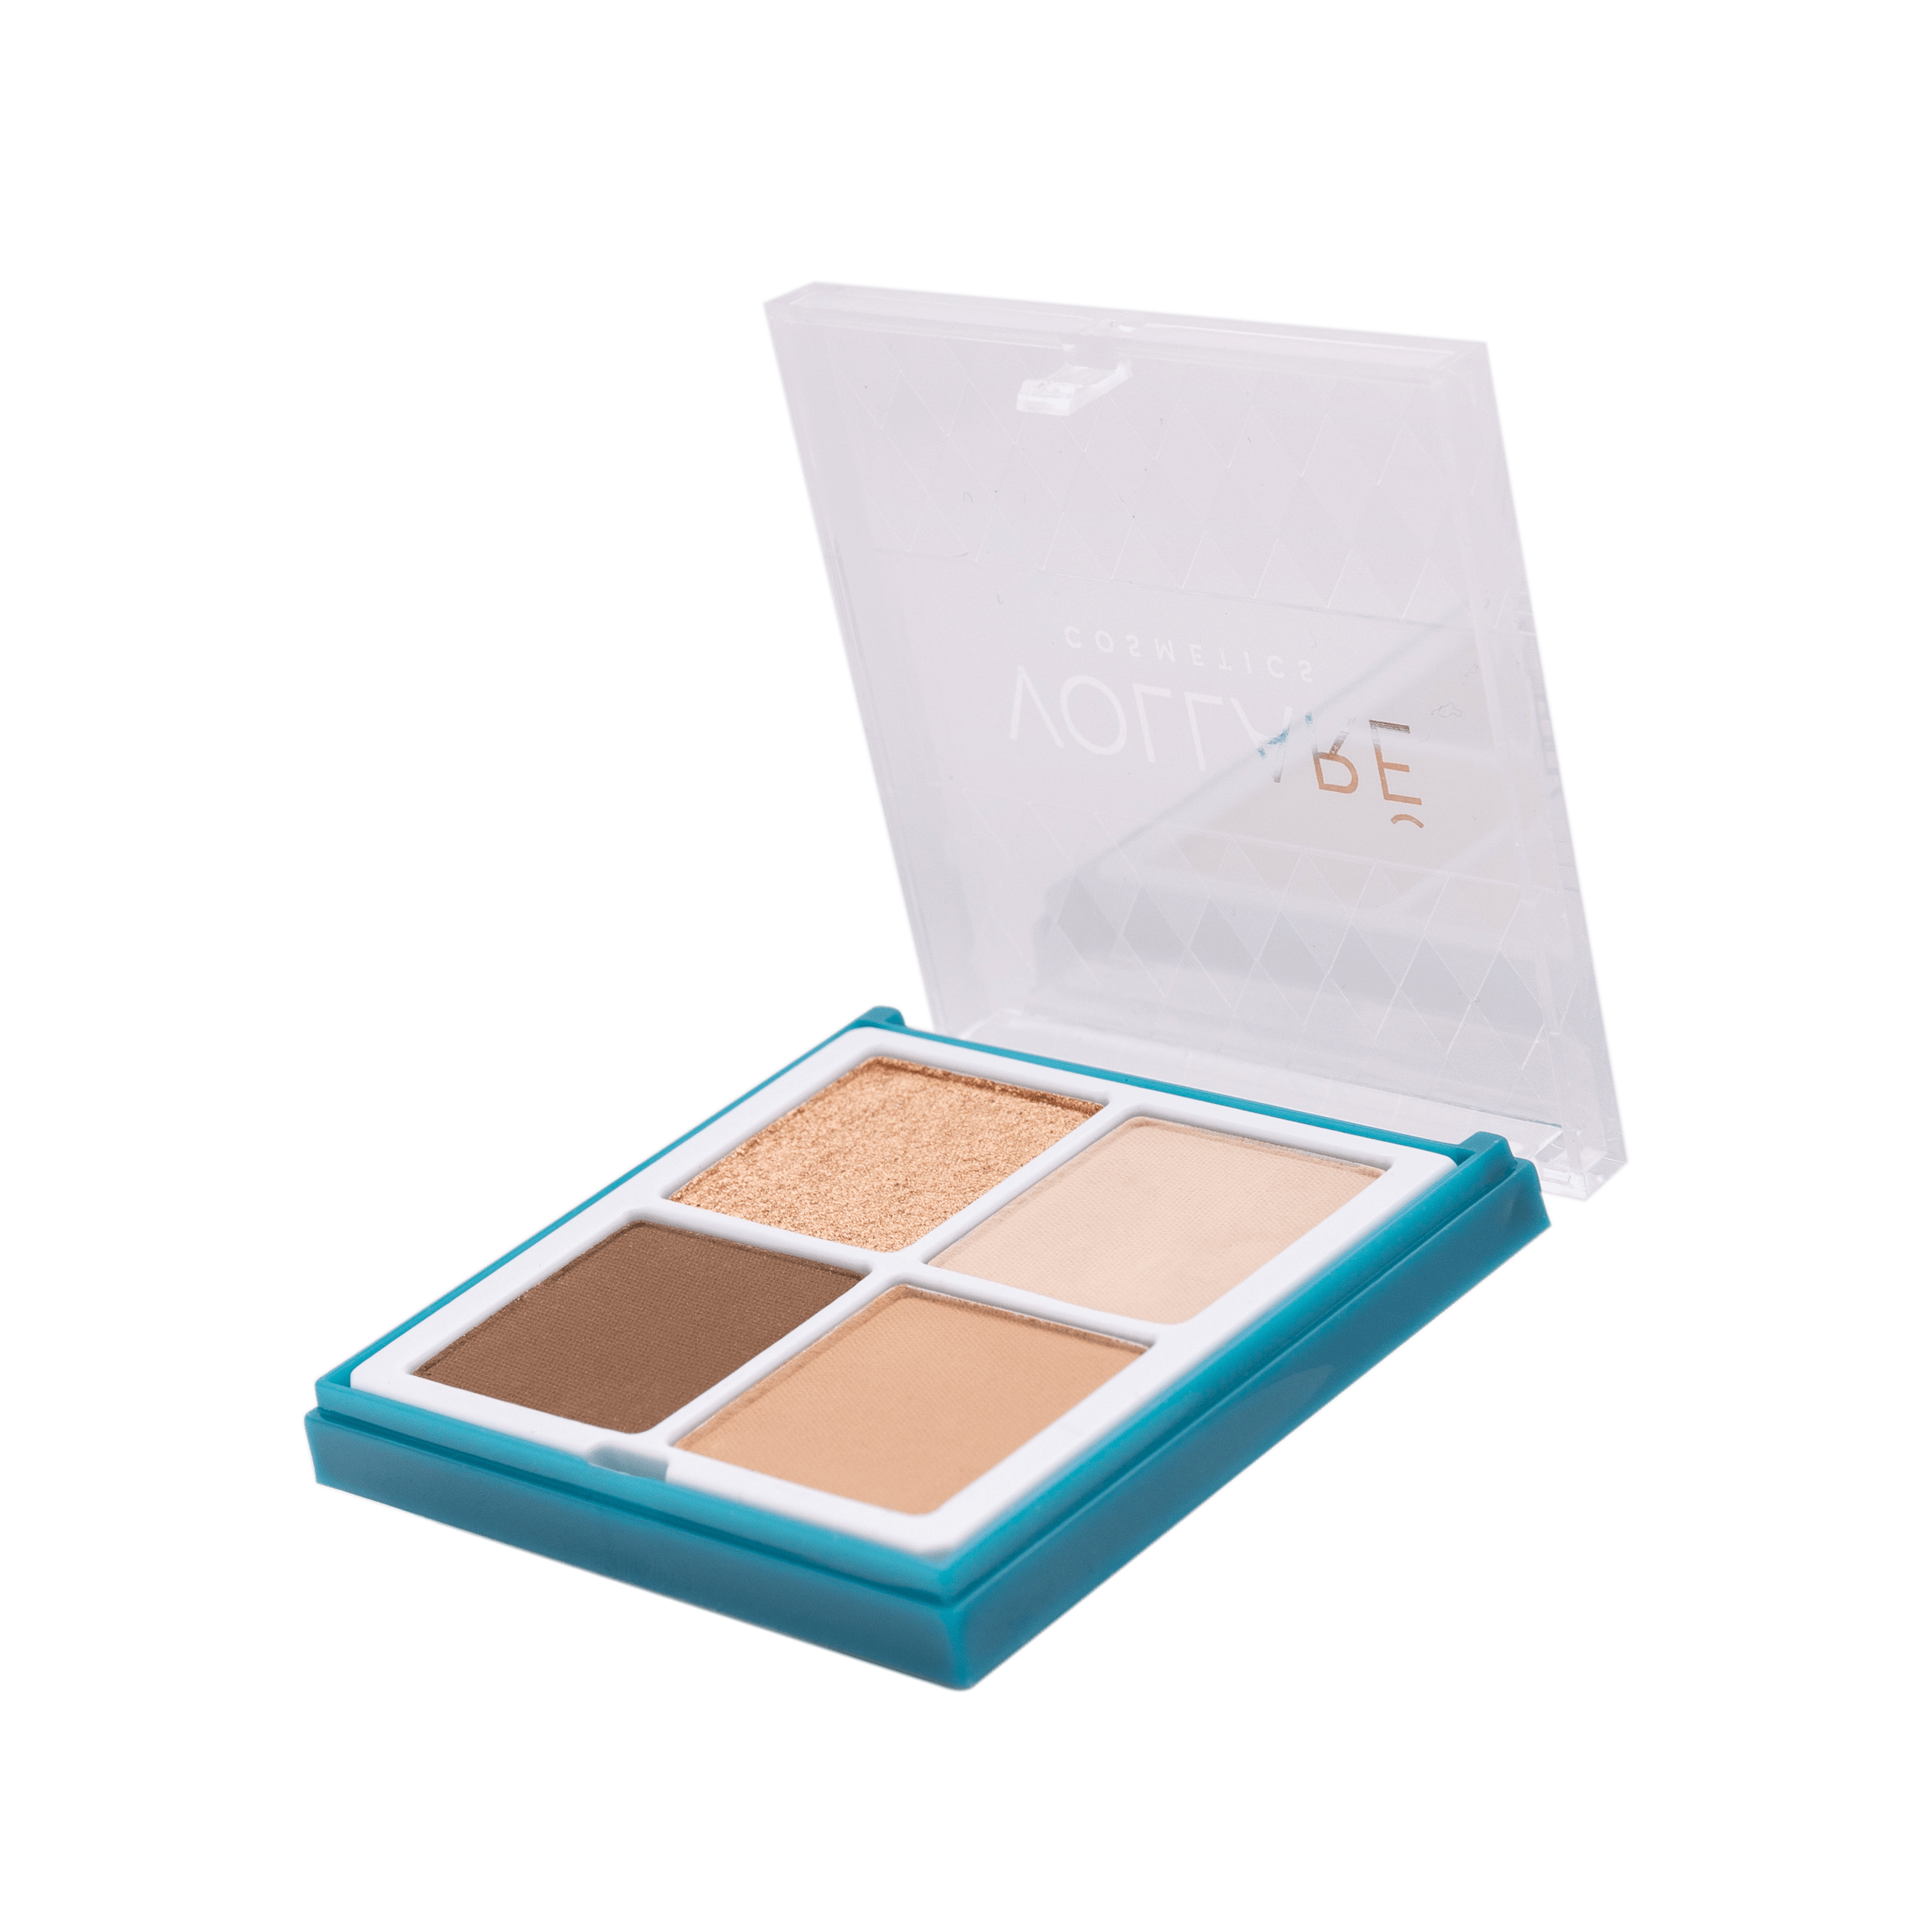 VOLLARE COSMETICS CRYSTAL CLEAR SAND EYESHADOW PALETTE